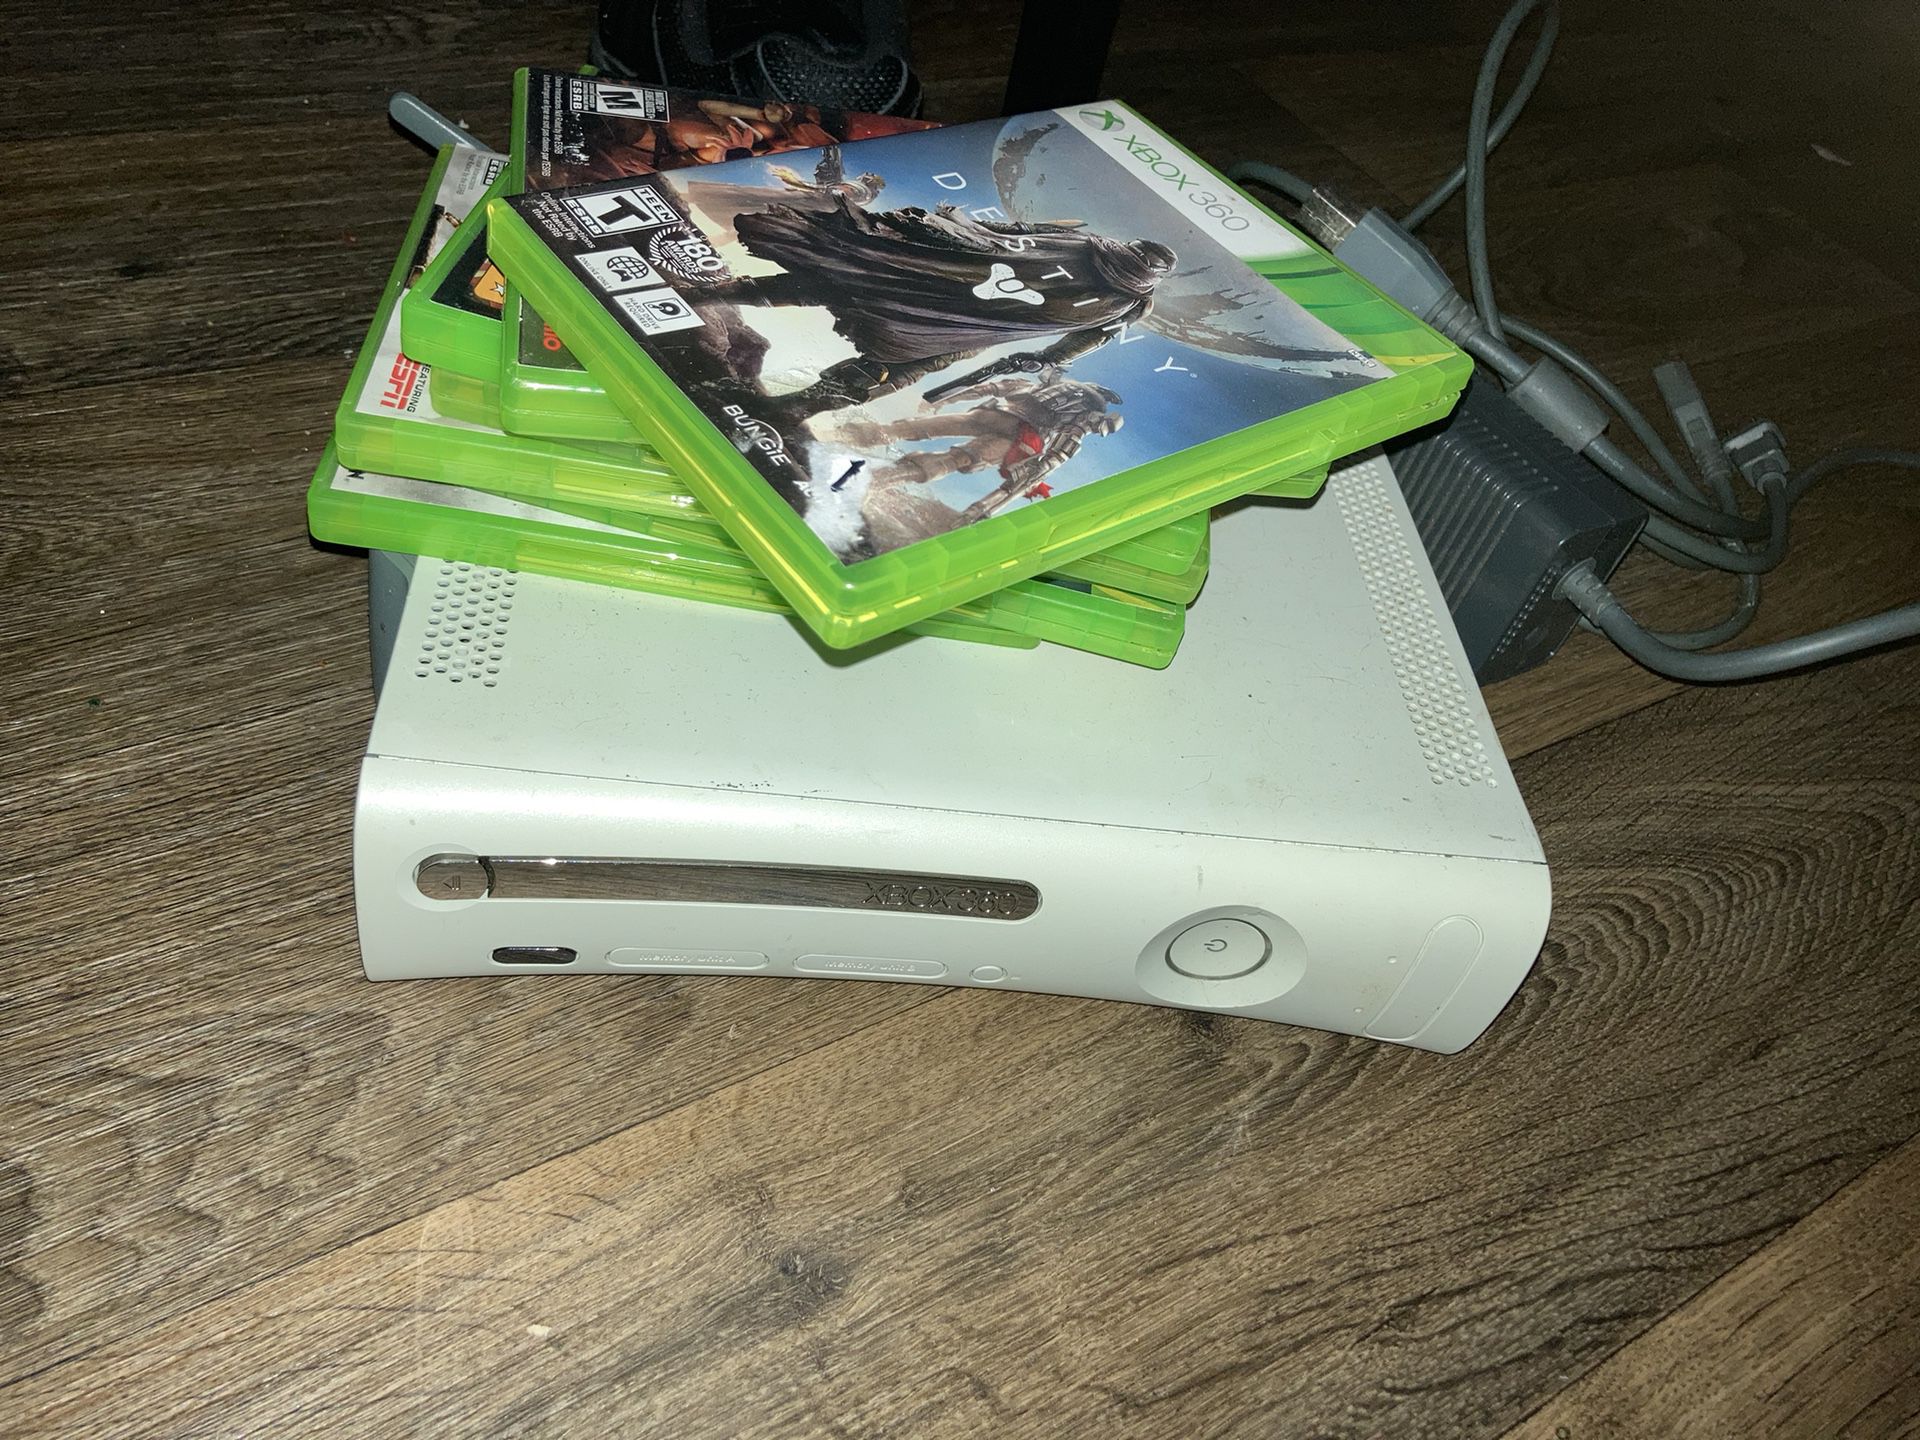 Xbox 360 And Games (Including NCAA13)